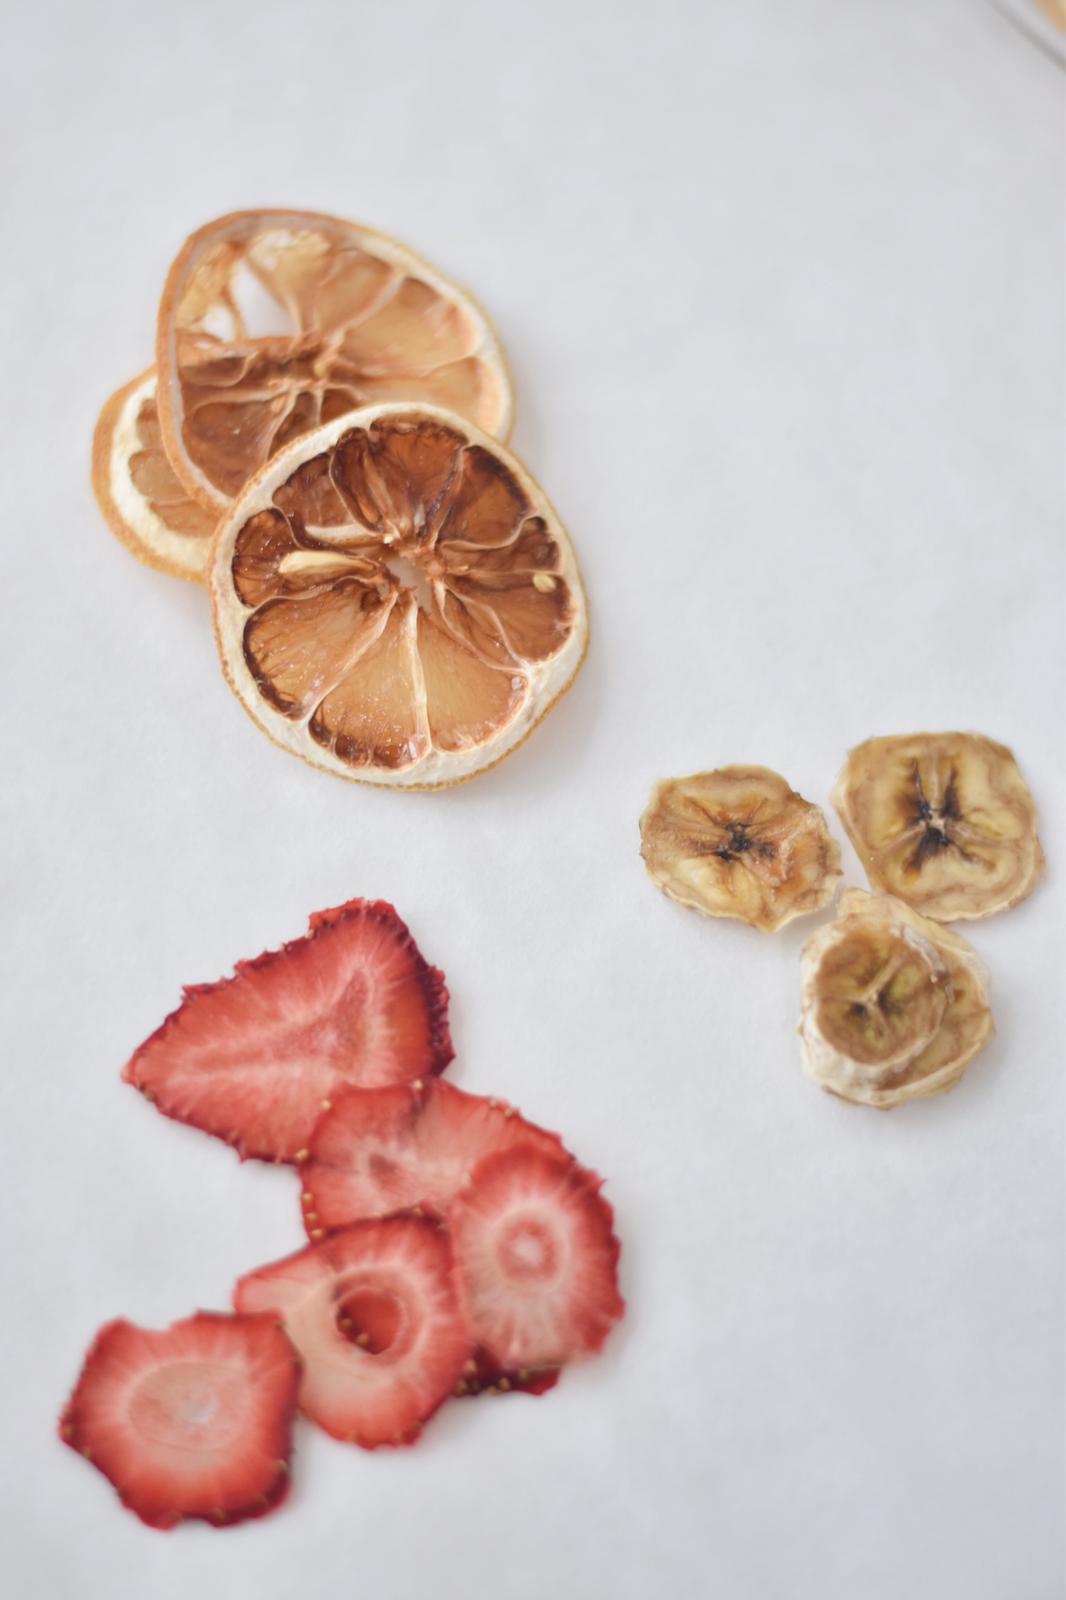 How to Make Dehydrated Fruits